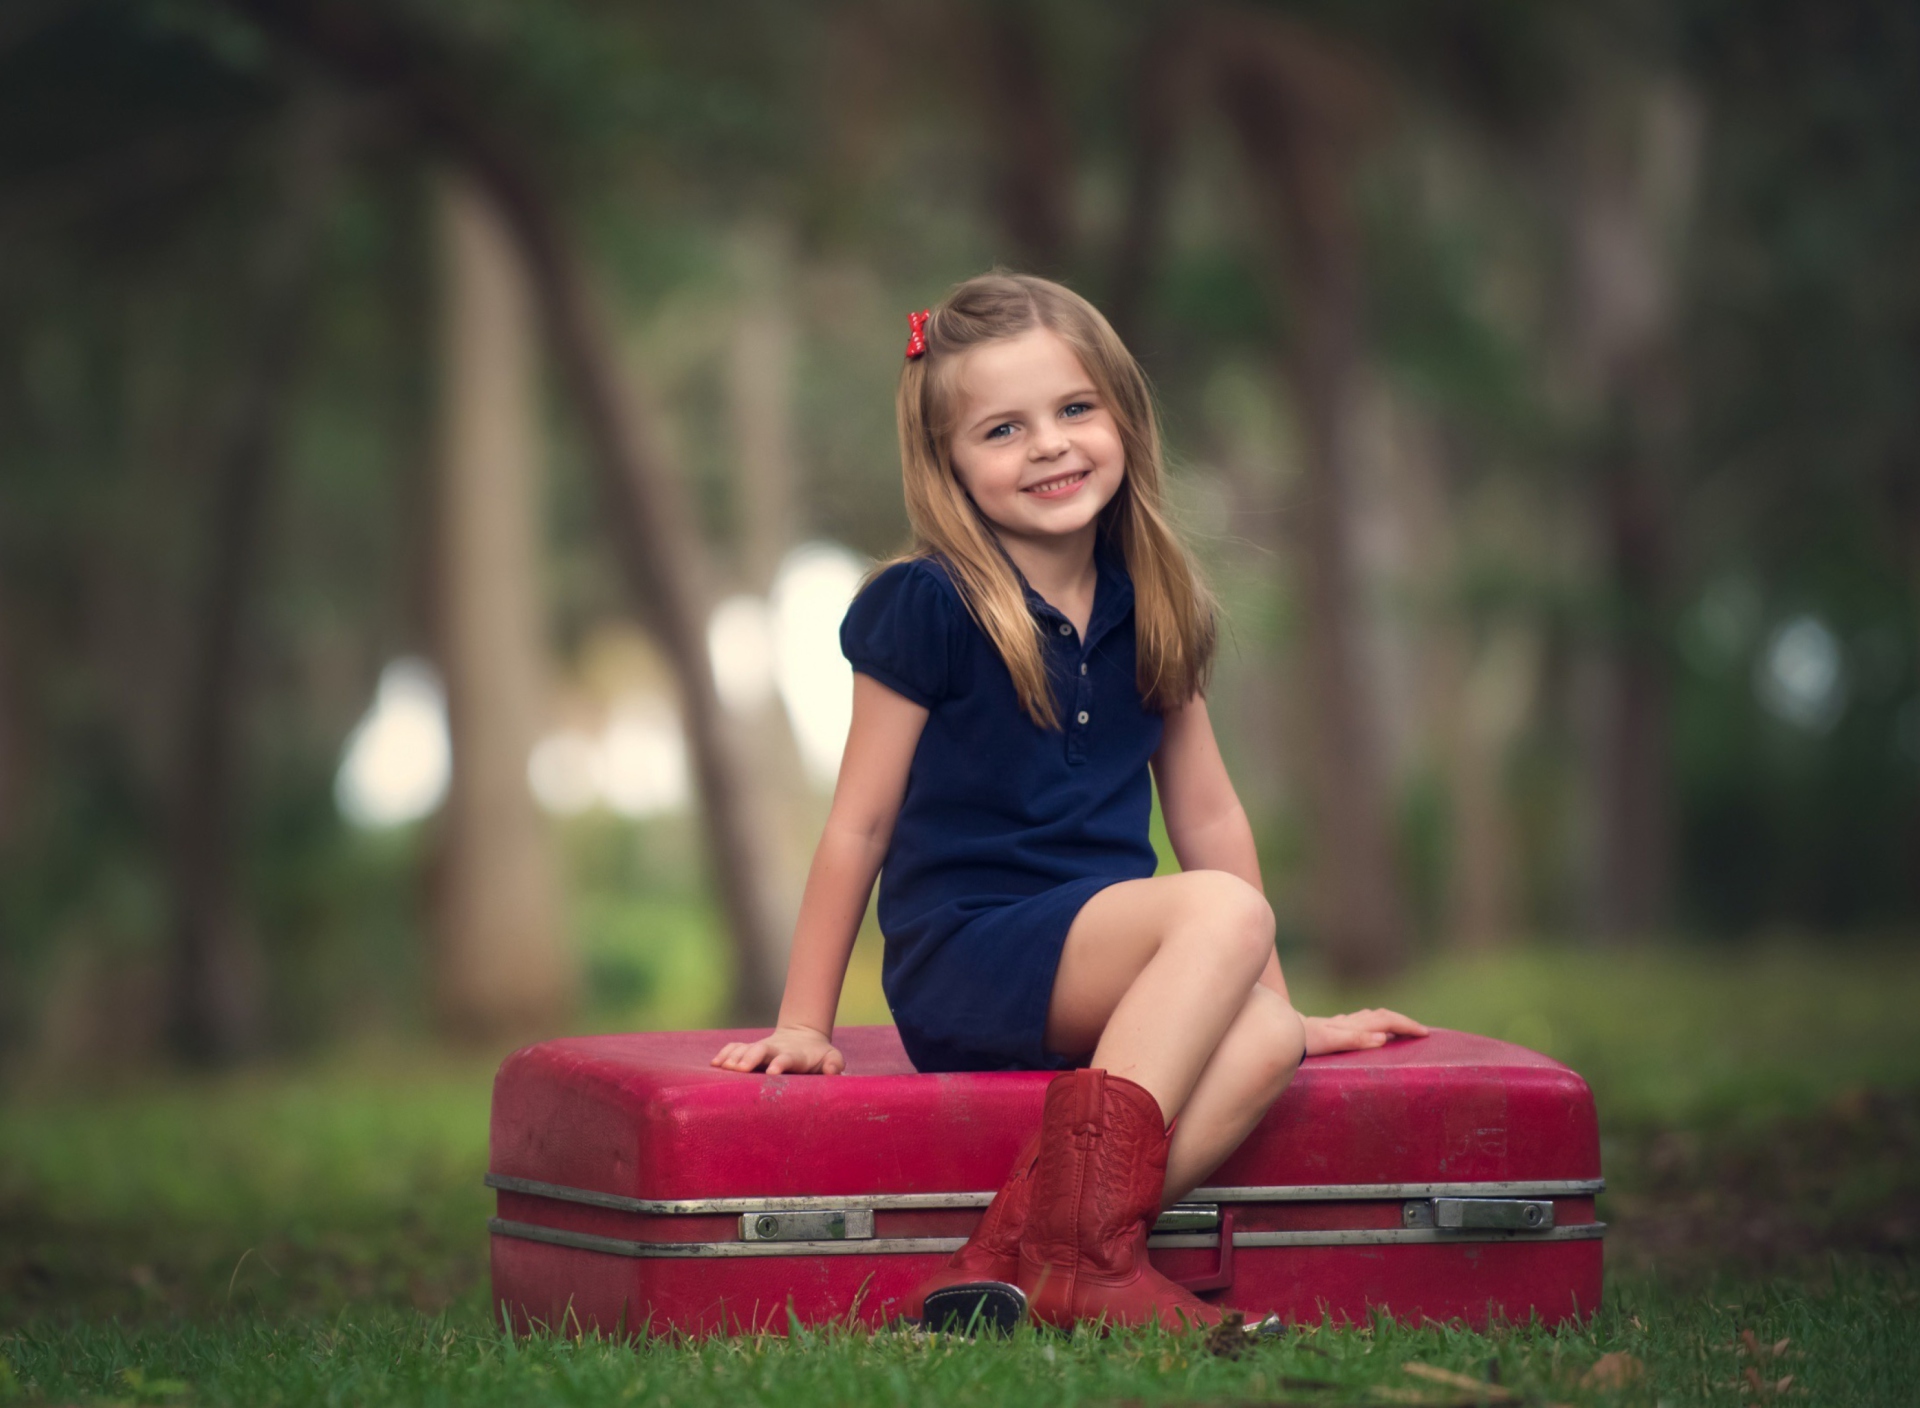 Little Girl Sitting On Red Suitcase wallpaper 1920x1408